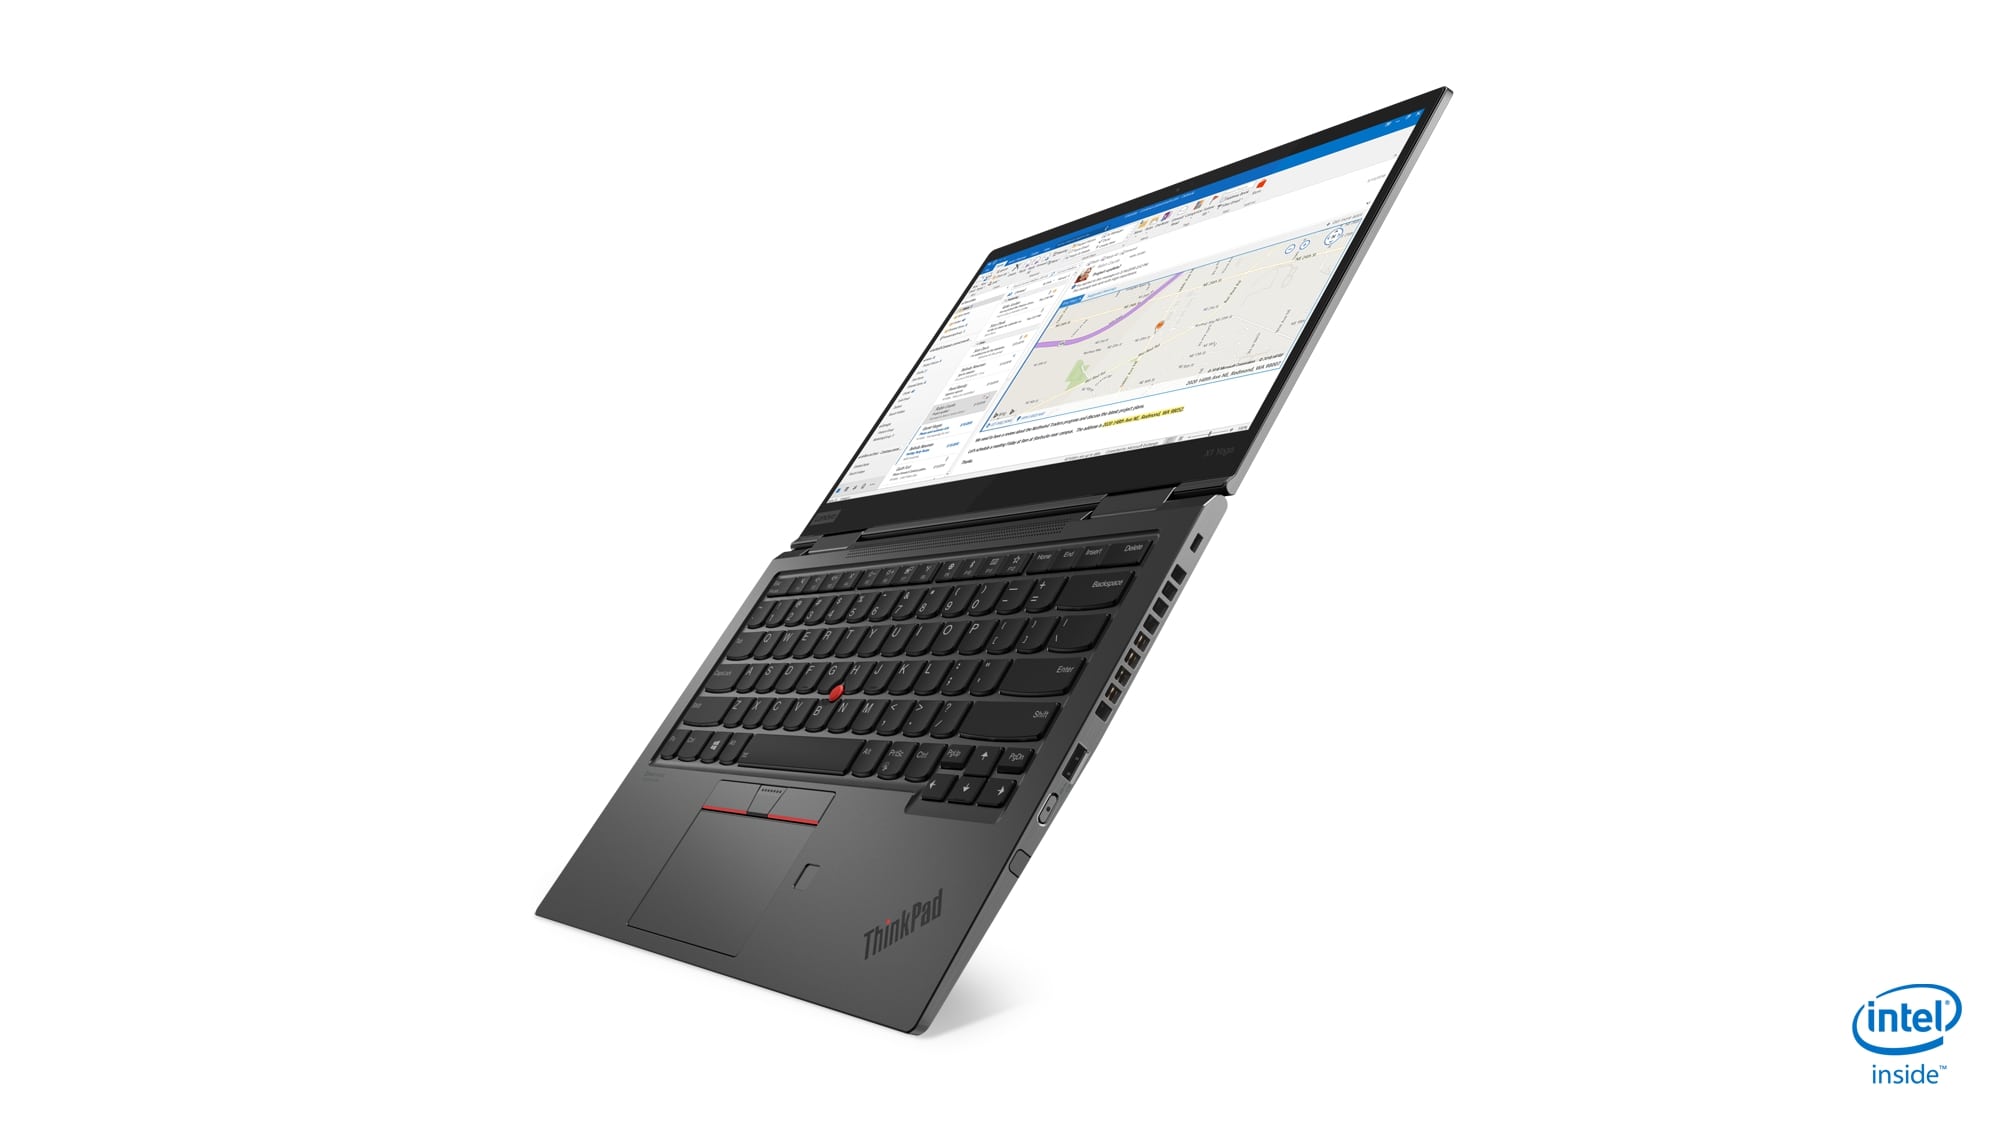 lenovo annouces new thinkpads with 10th gen cometlake 04 x1 yoga hero left 180 degree